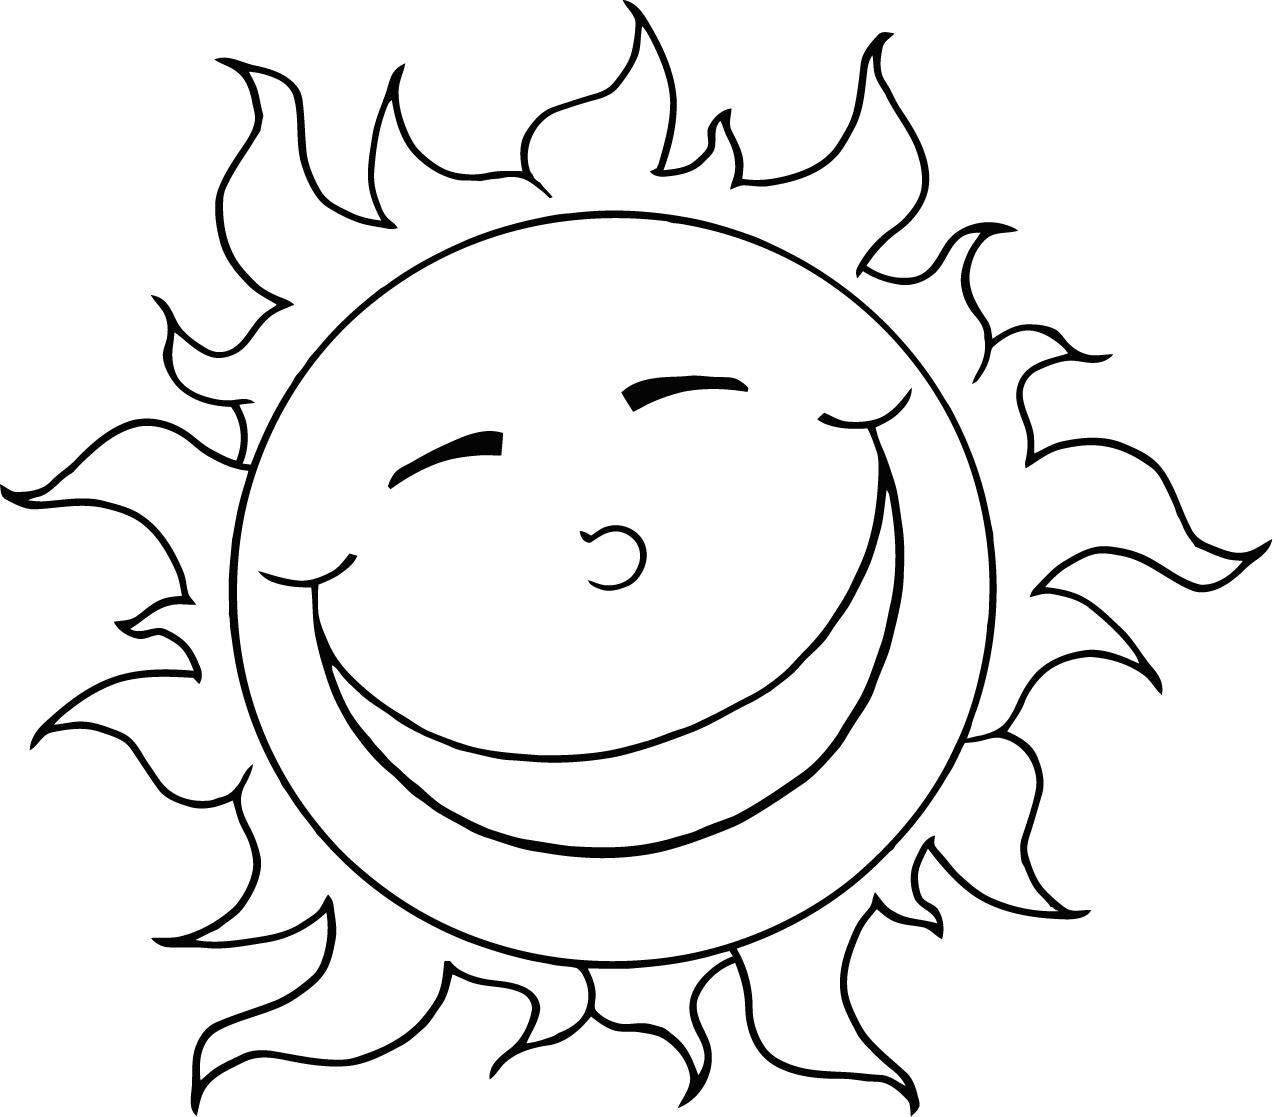 Coloring Page of the Sun